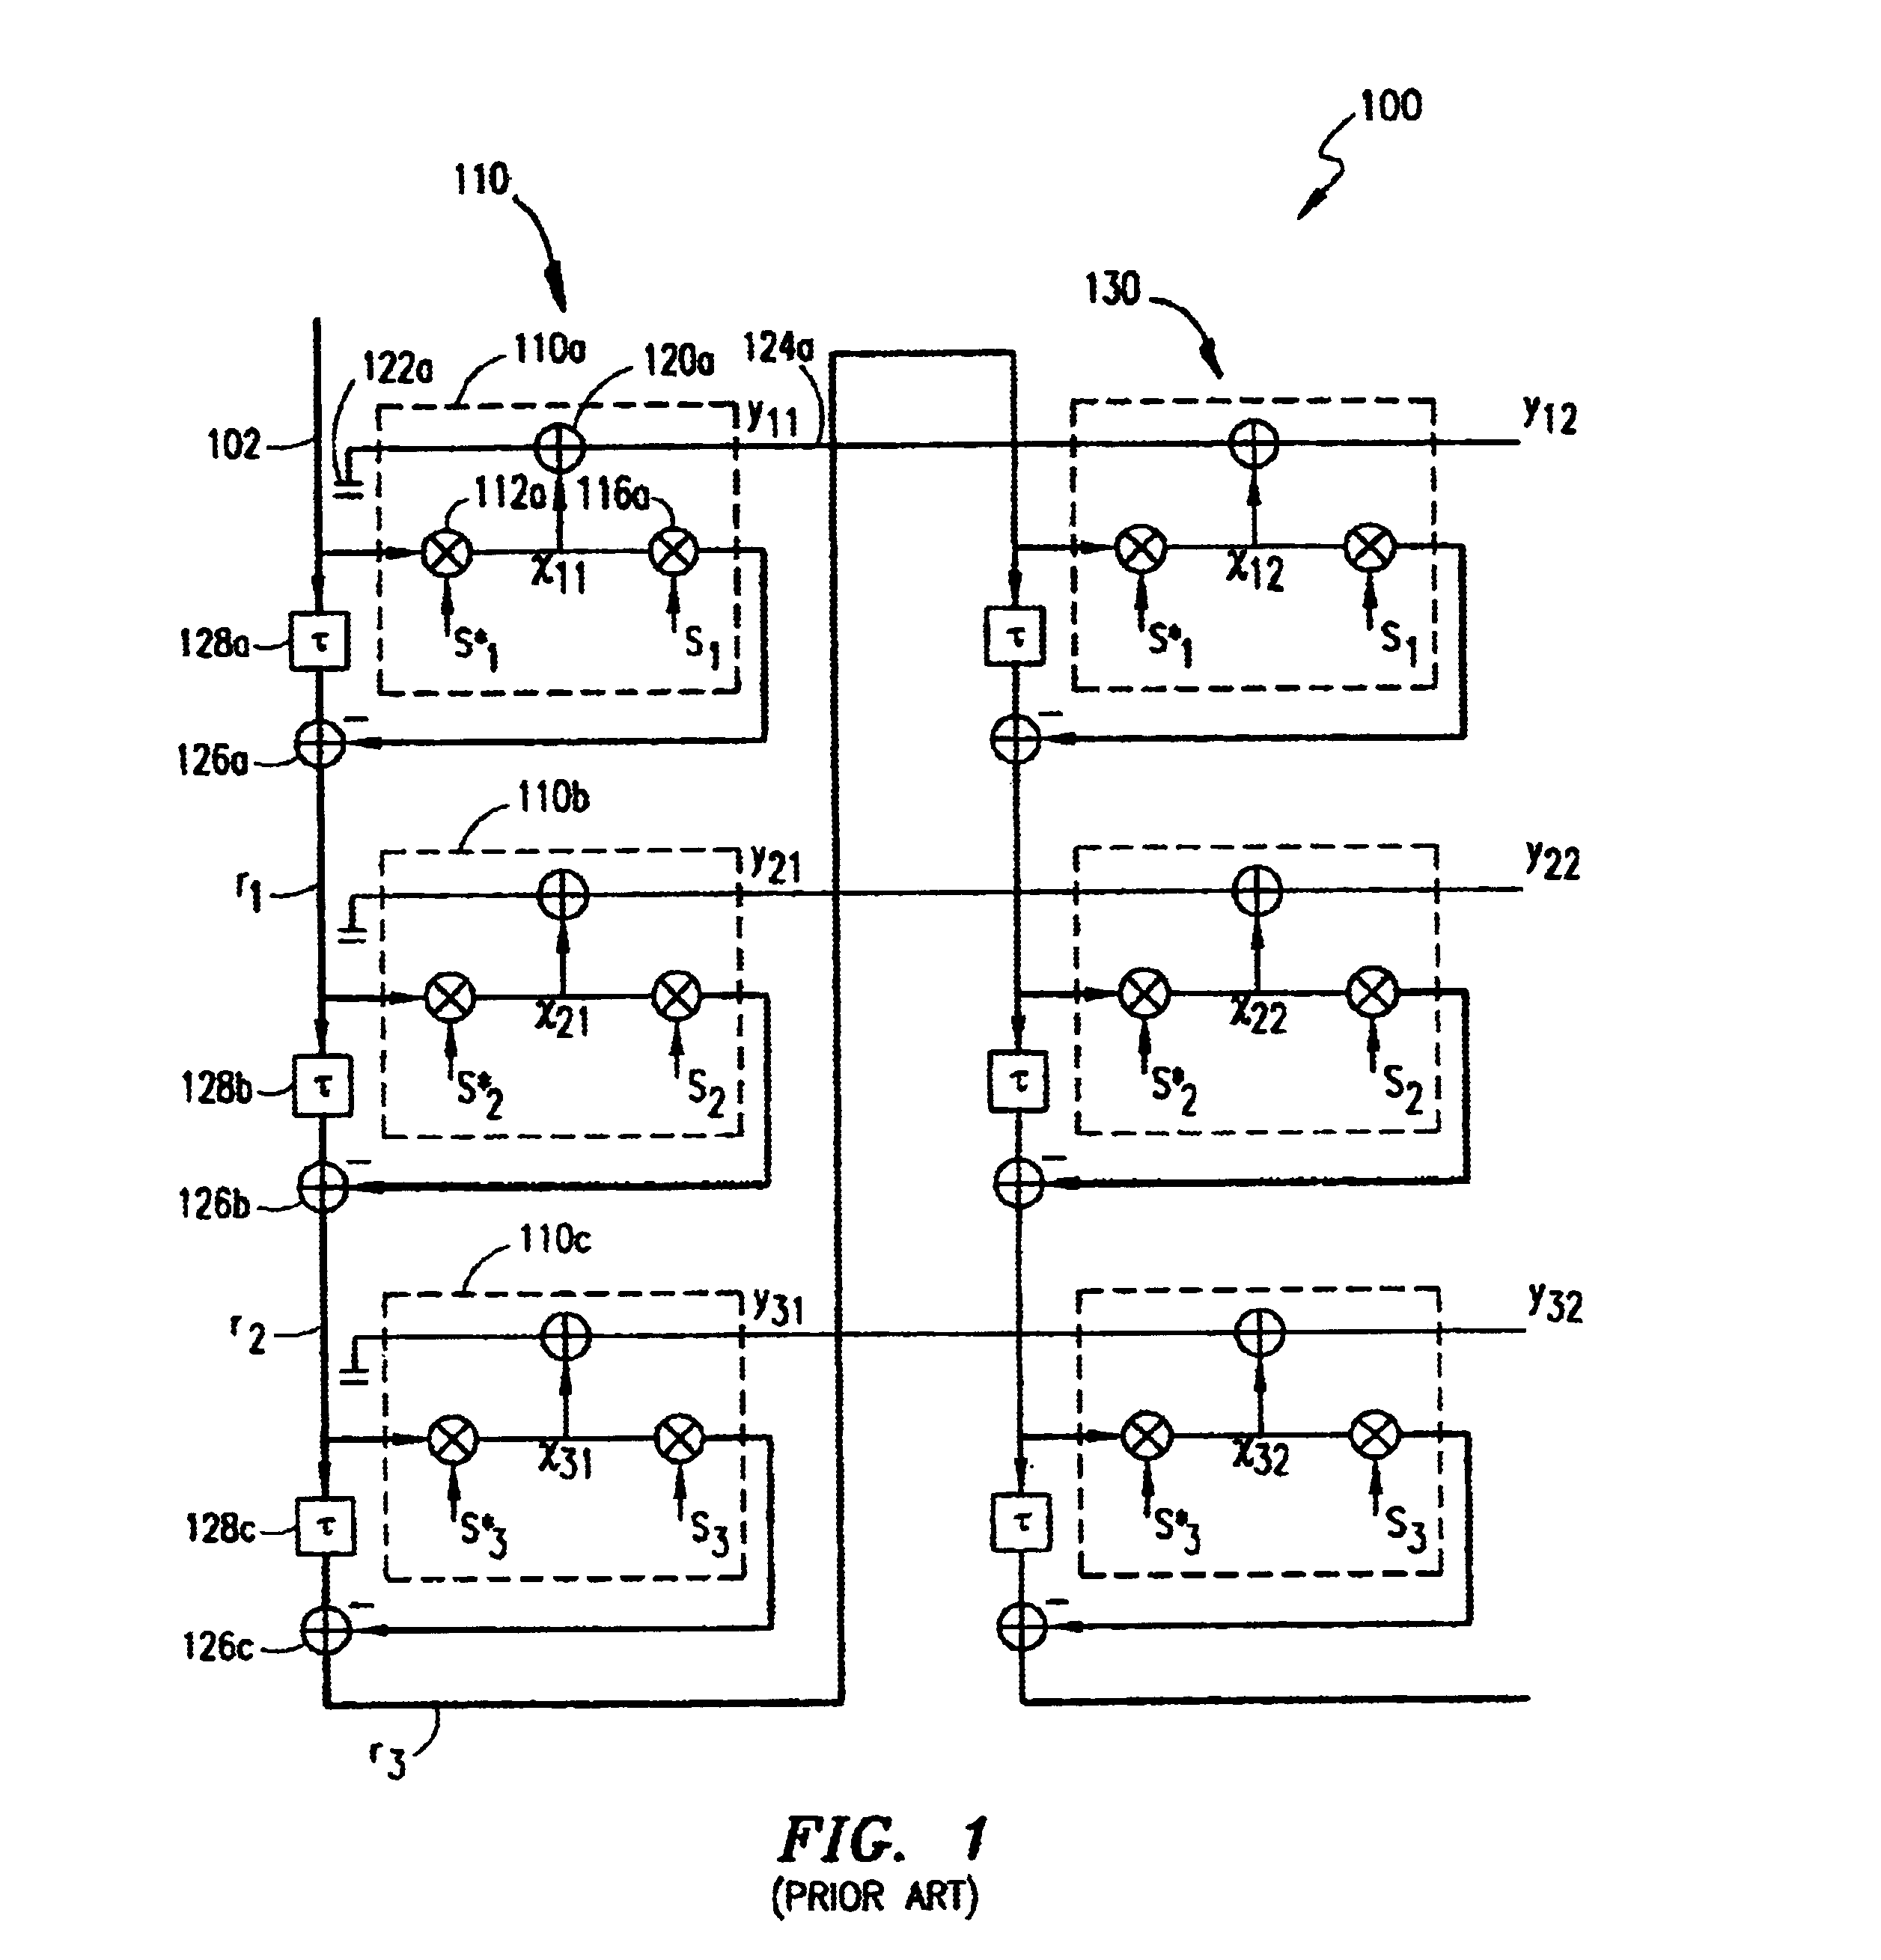 Reduction of linear interference canceling scheme